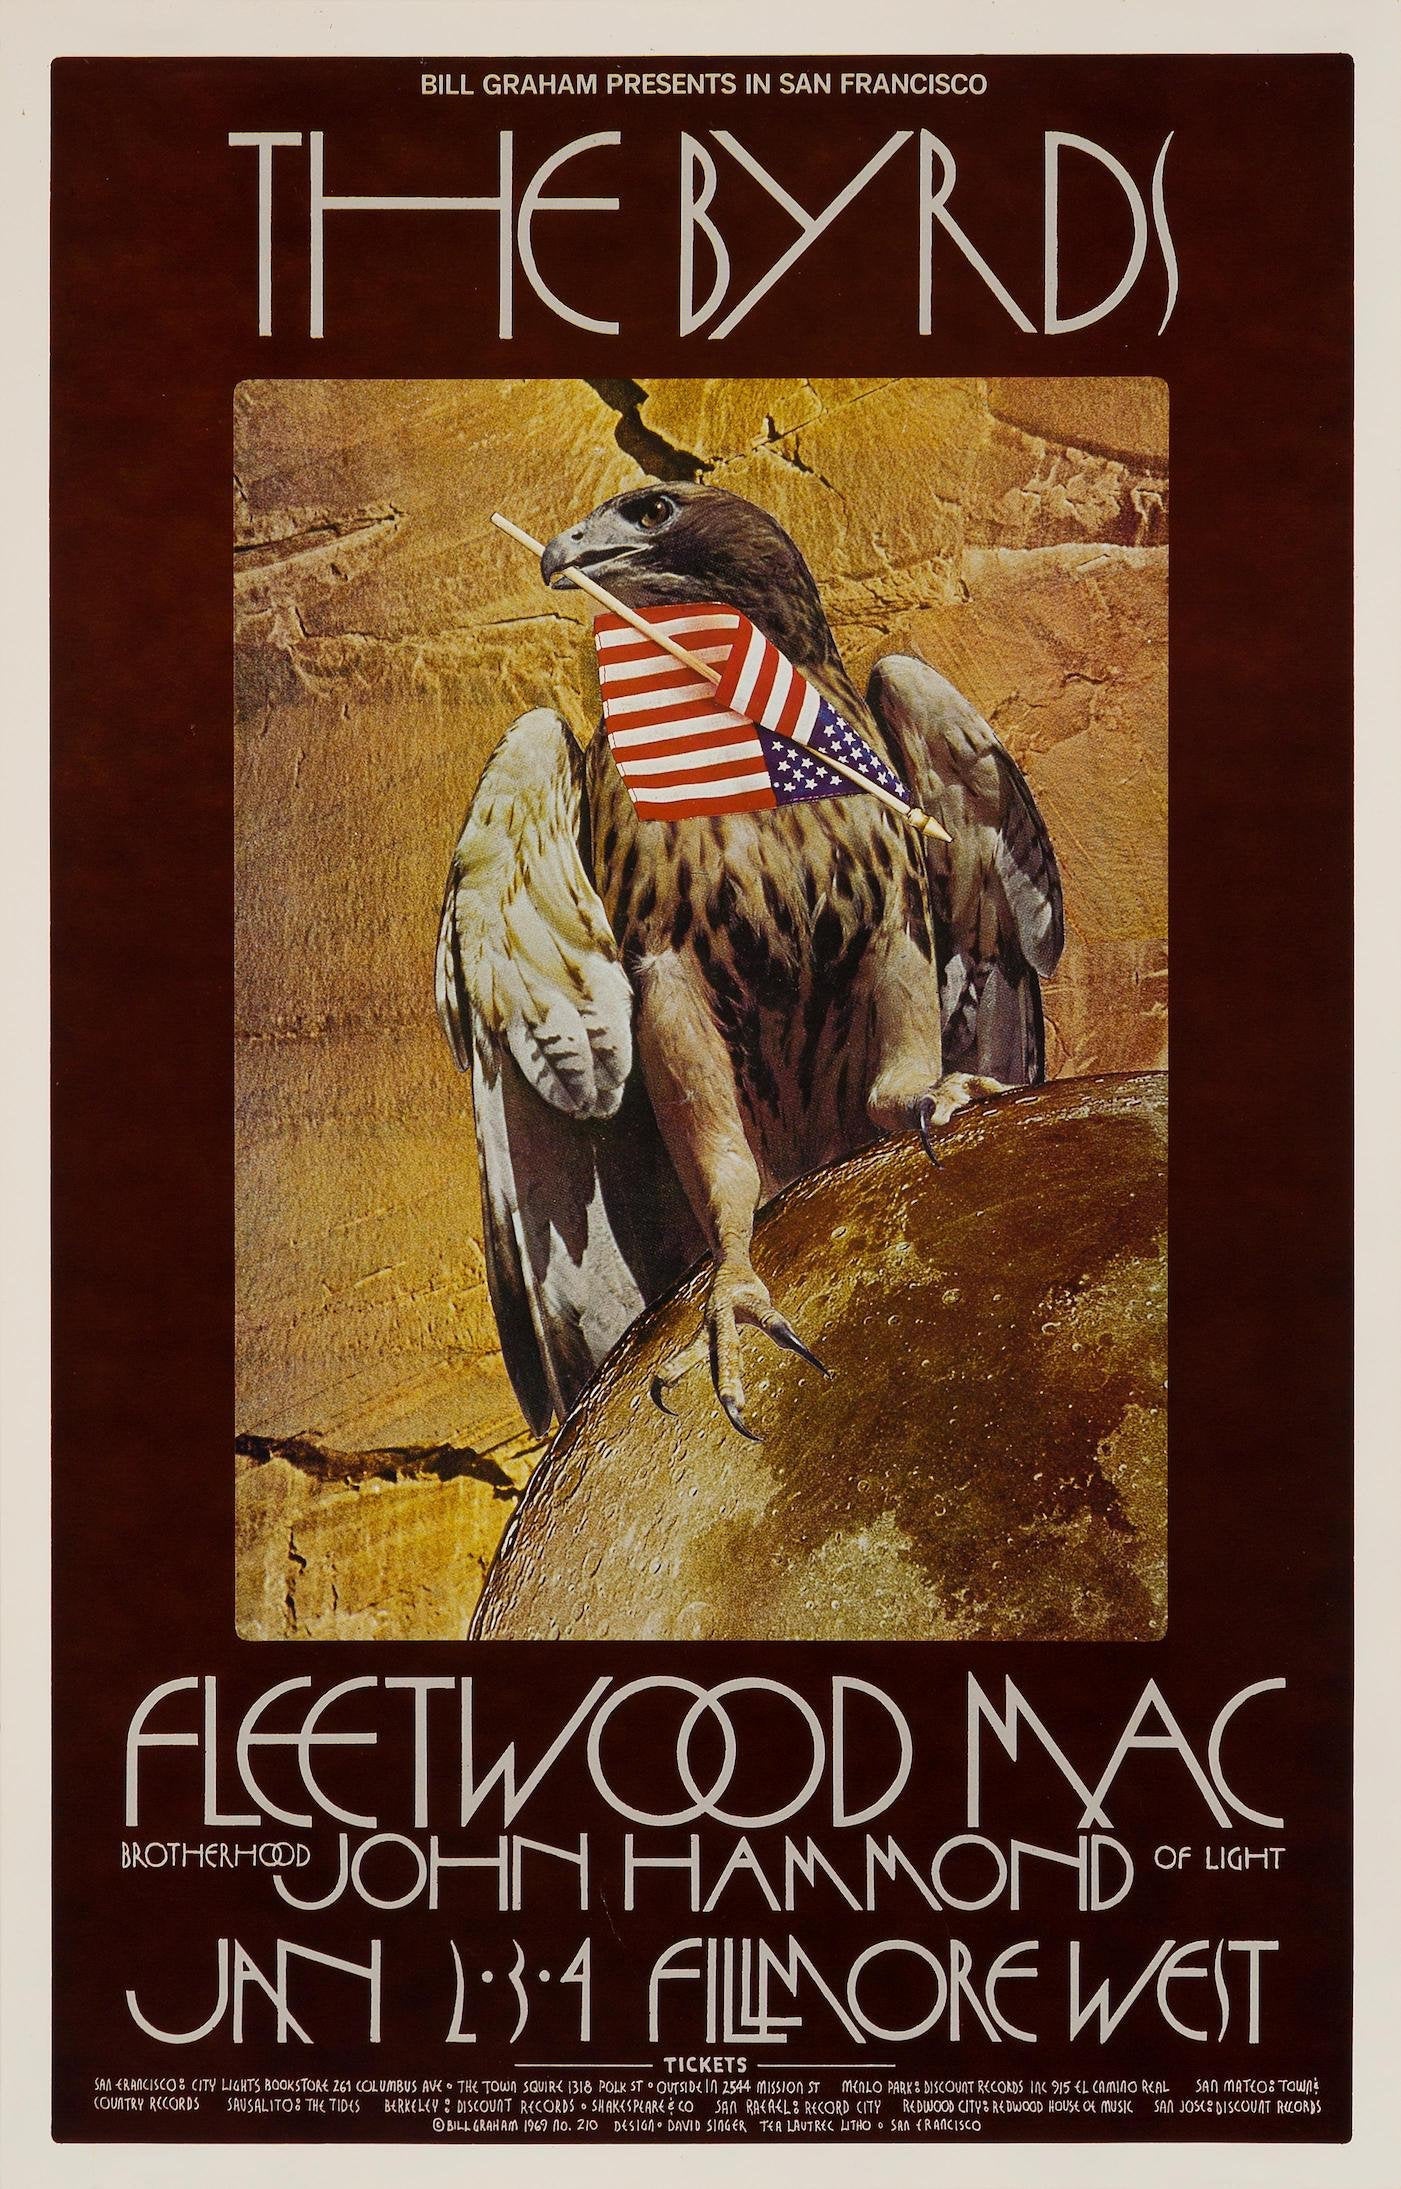 Vintage Music Art  - The Byrds & Fleetwood Mac At Fillmore West   0821